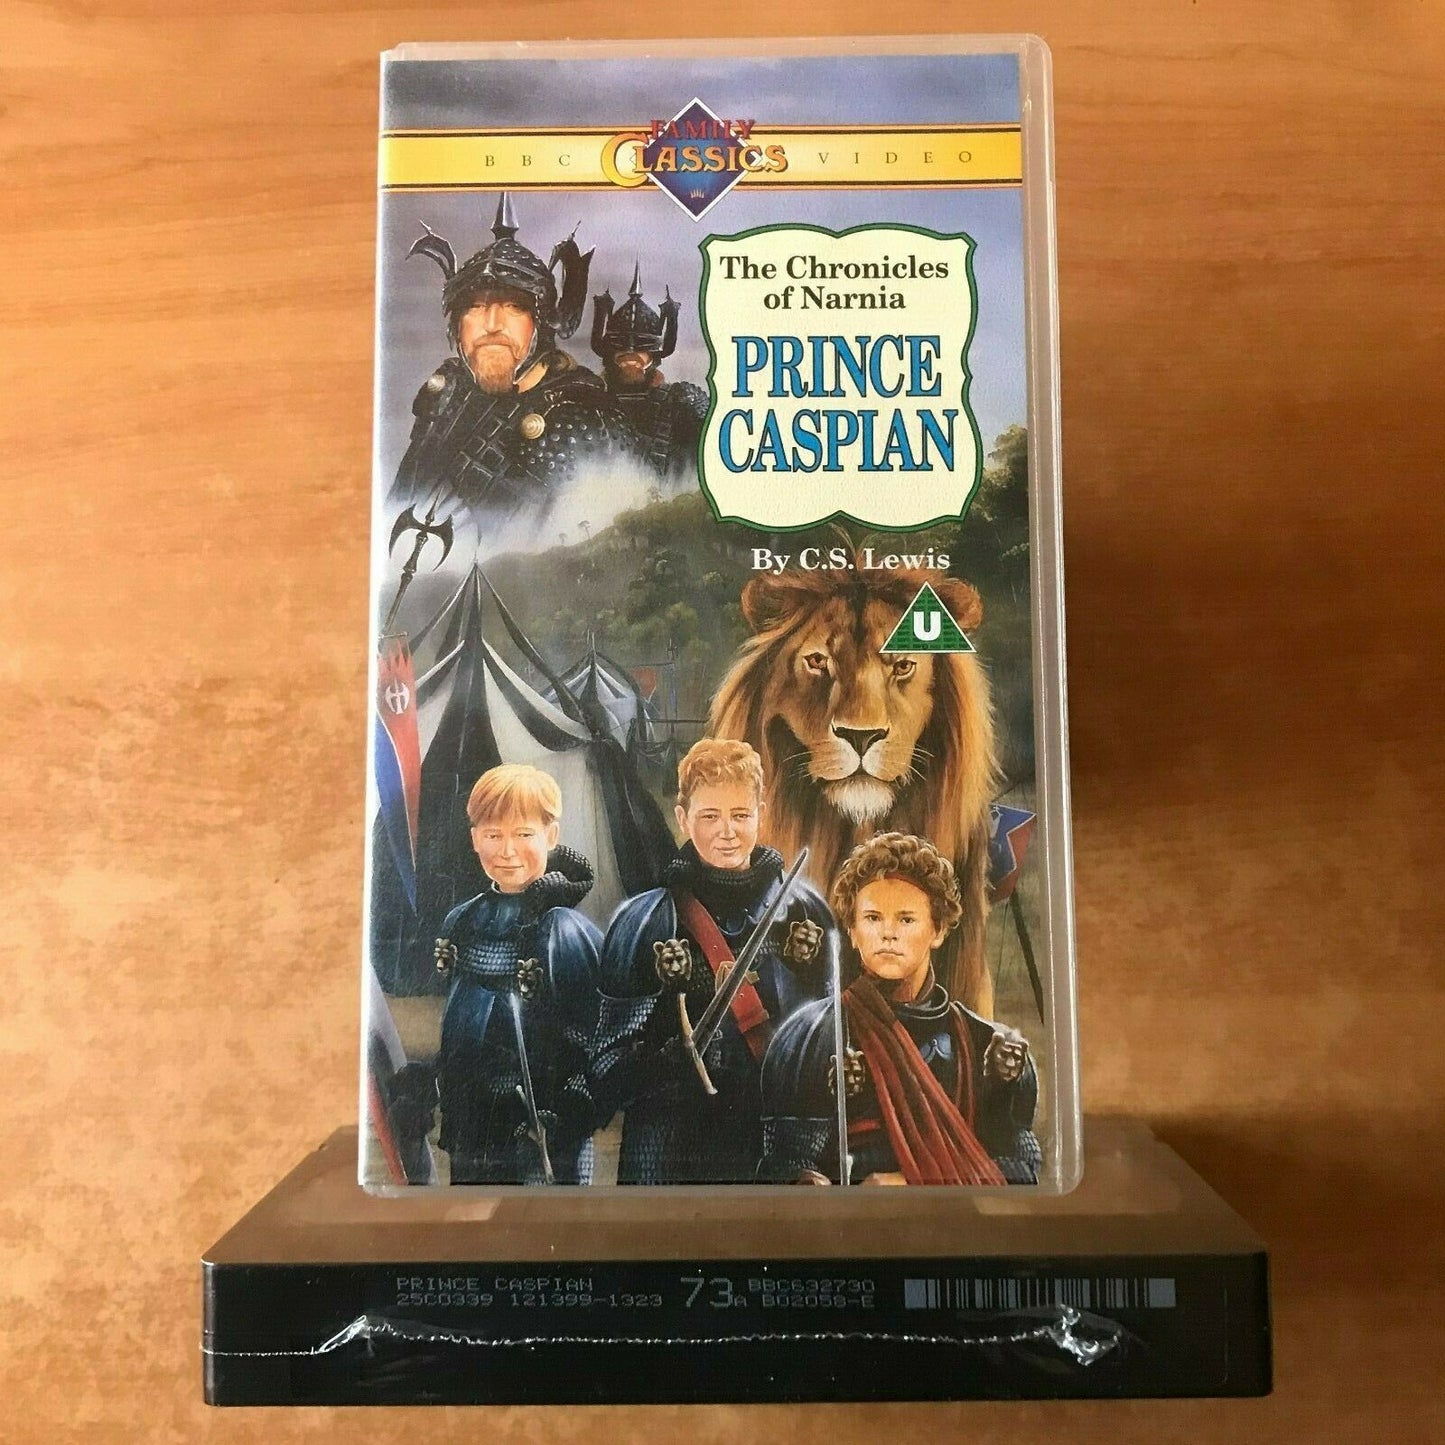 The Chronicles Of Narnia: Prince Caspian [C.S. Lewis] Brand New Sealed - Pal VHS-